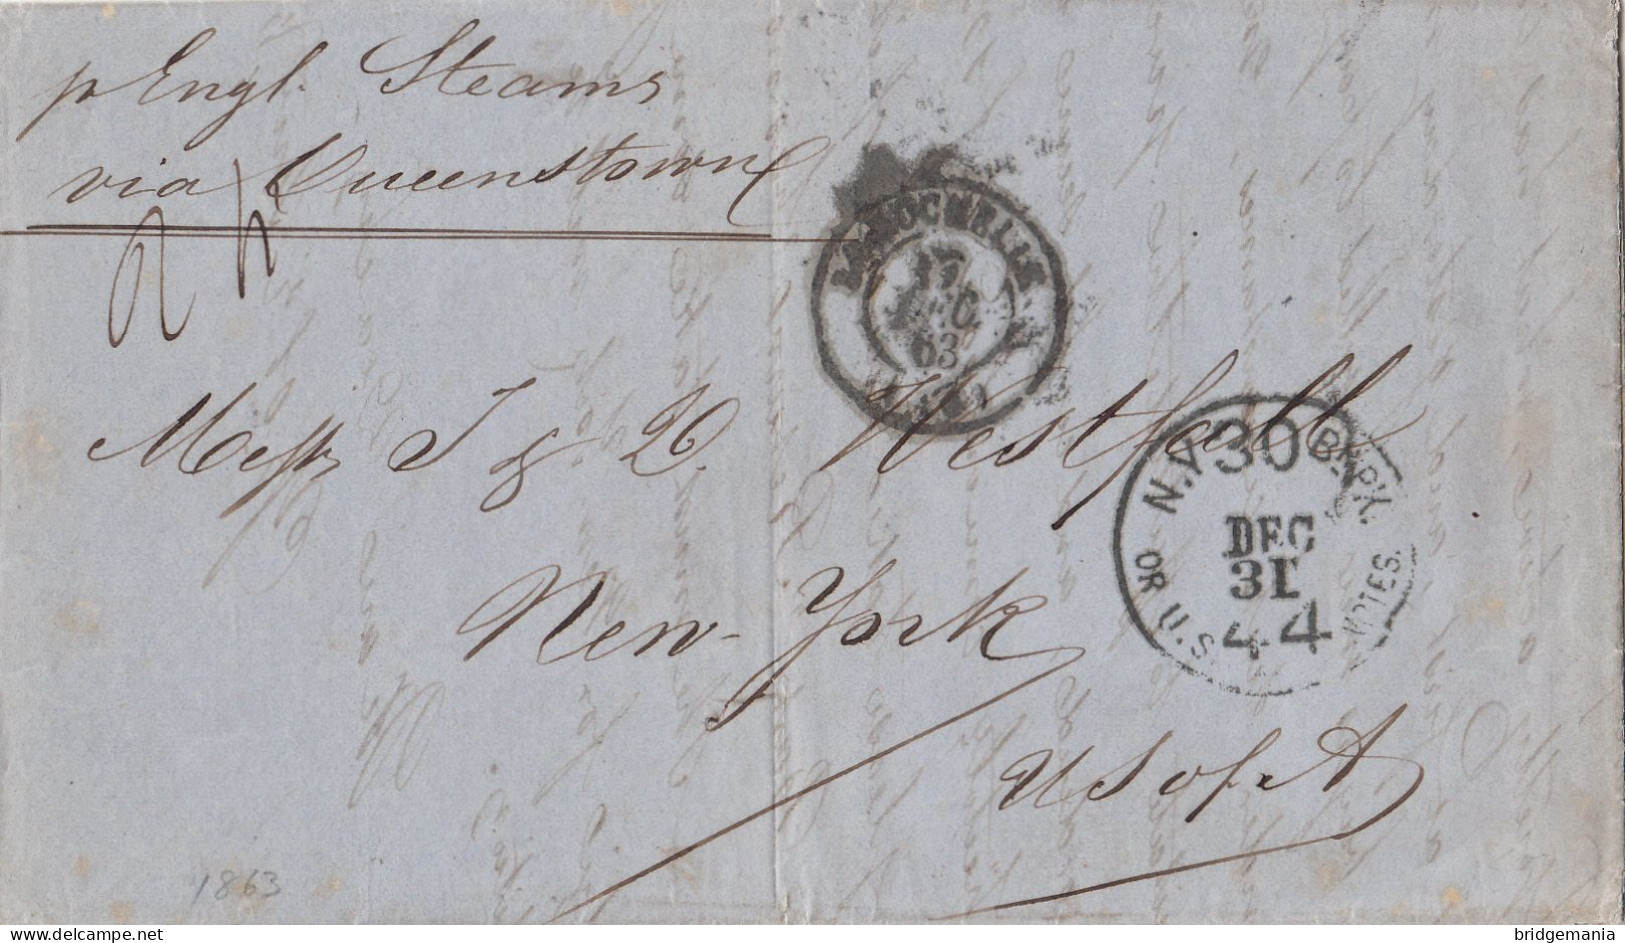 MTM145 - 1863 TRANSATLANTIC LETTER FRANCE TO USA Steamer PERSIA CUNARD - UNPAID 2 RATE - DEPRECIATED CURRENCY - Poststempel